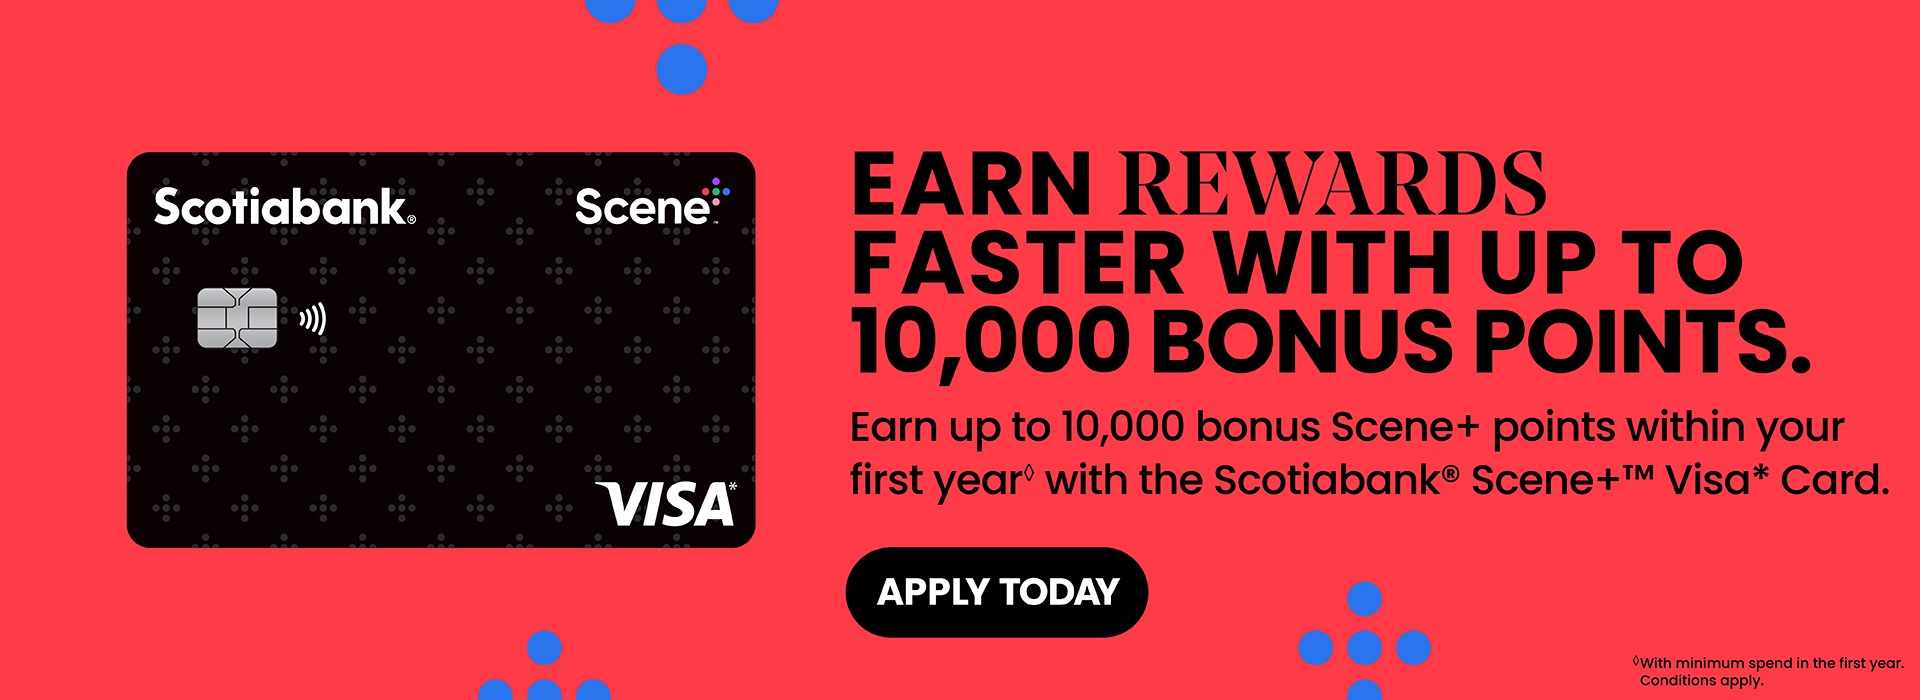 Text Reading 'Earn rewards faster with up to 10,000 bonus points. Earn up to 10,000 bonus Scene+ points within your first year with the Scotiabank Scene+ Visa Card. You can 'Apply Today' by clicking on the button below.'